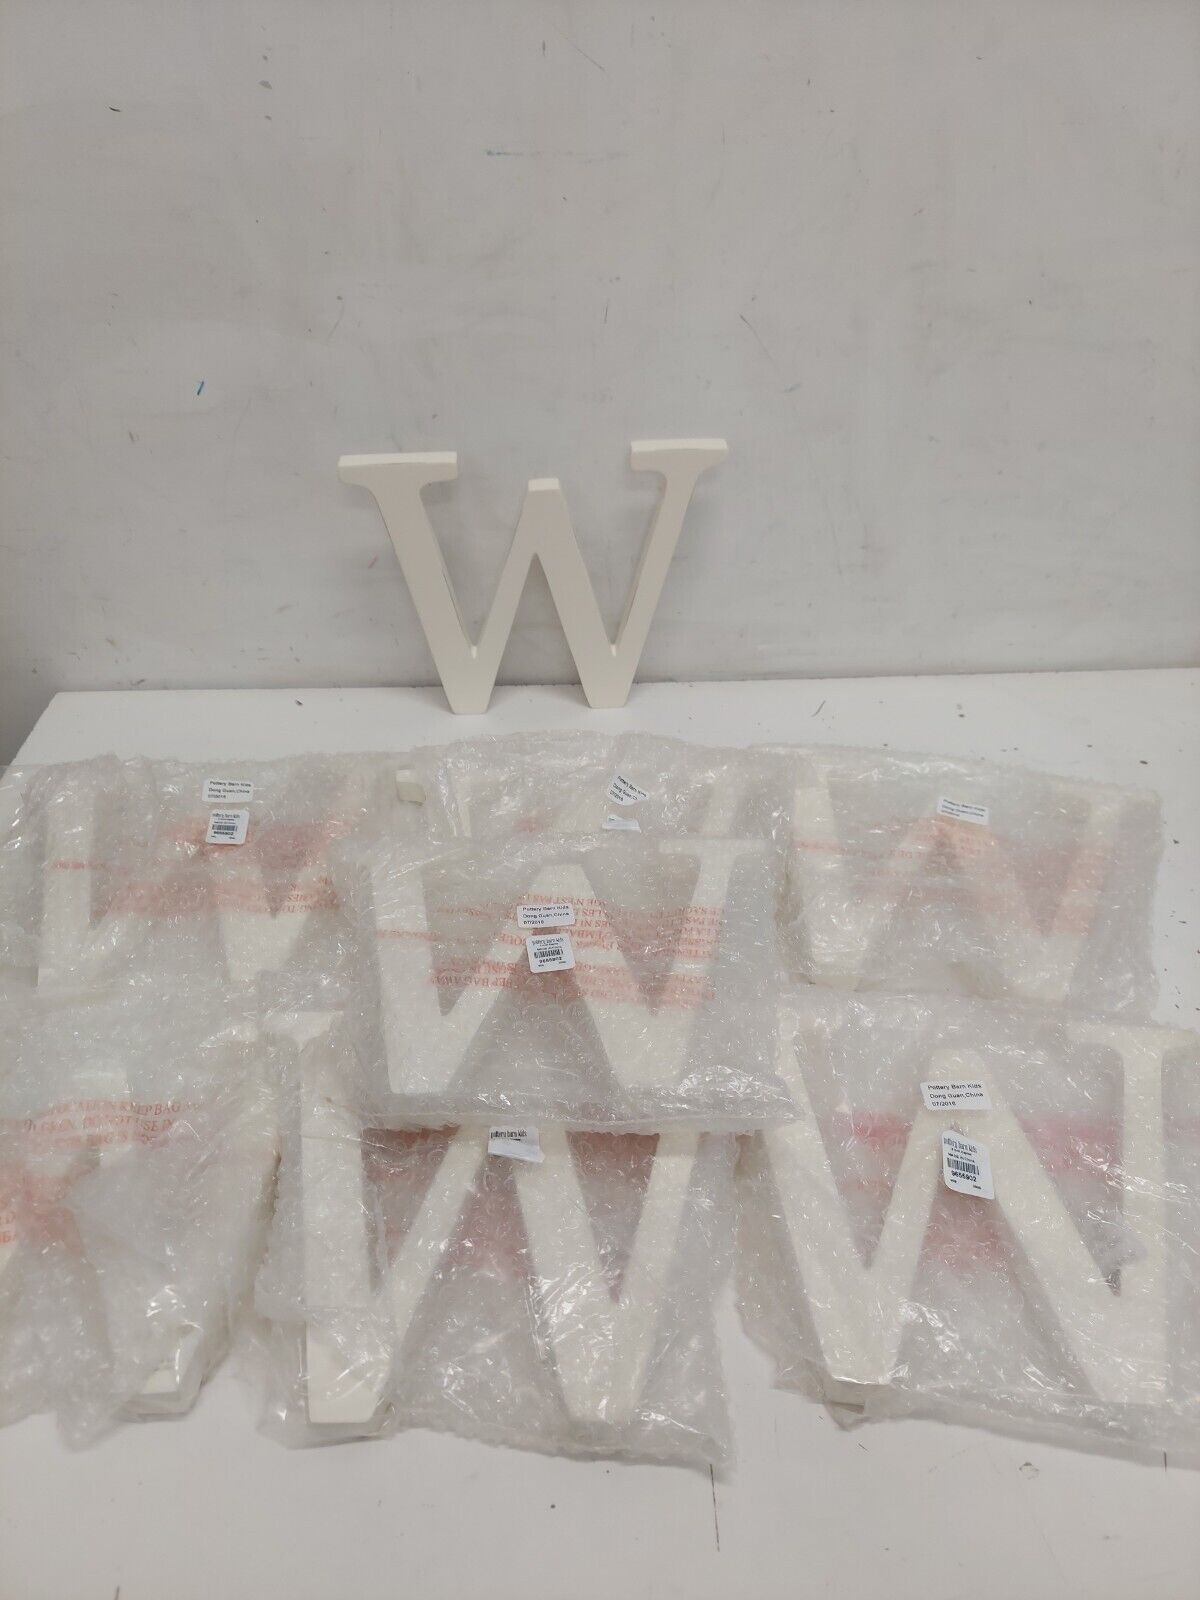 Pottery Barn 8 Inch Simply White Capital 'w' Wall Letters 8 Pack  New